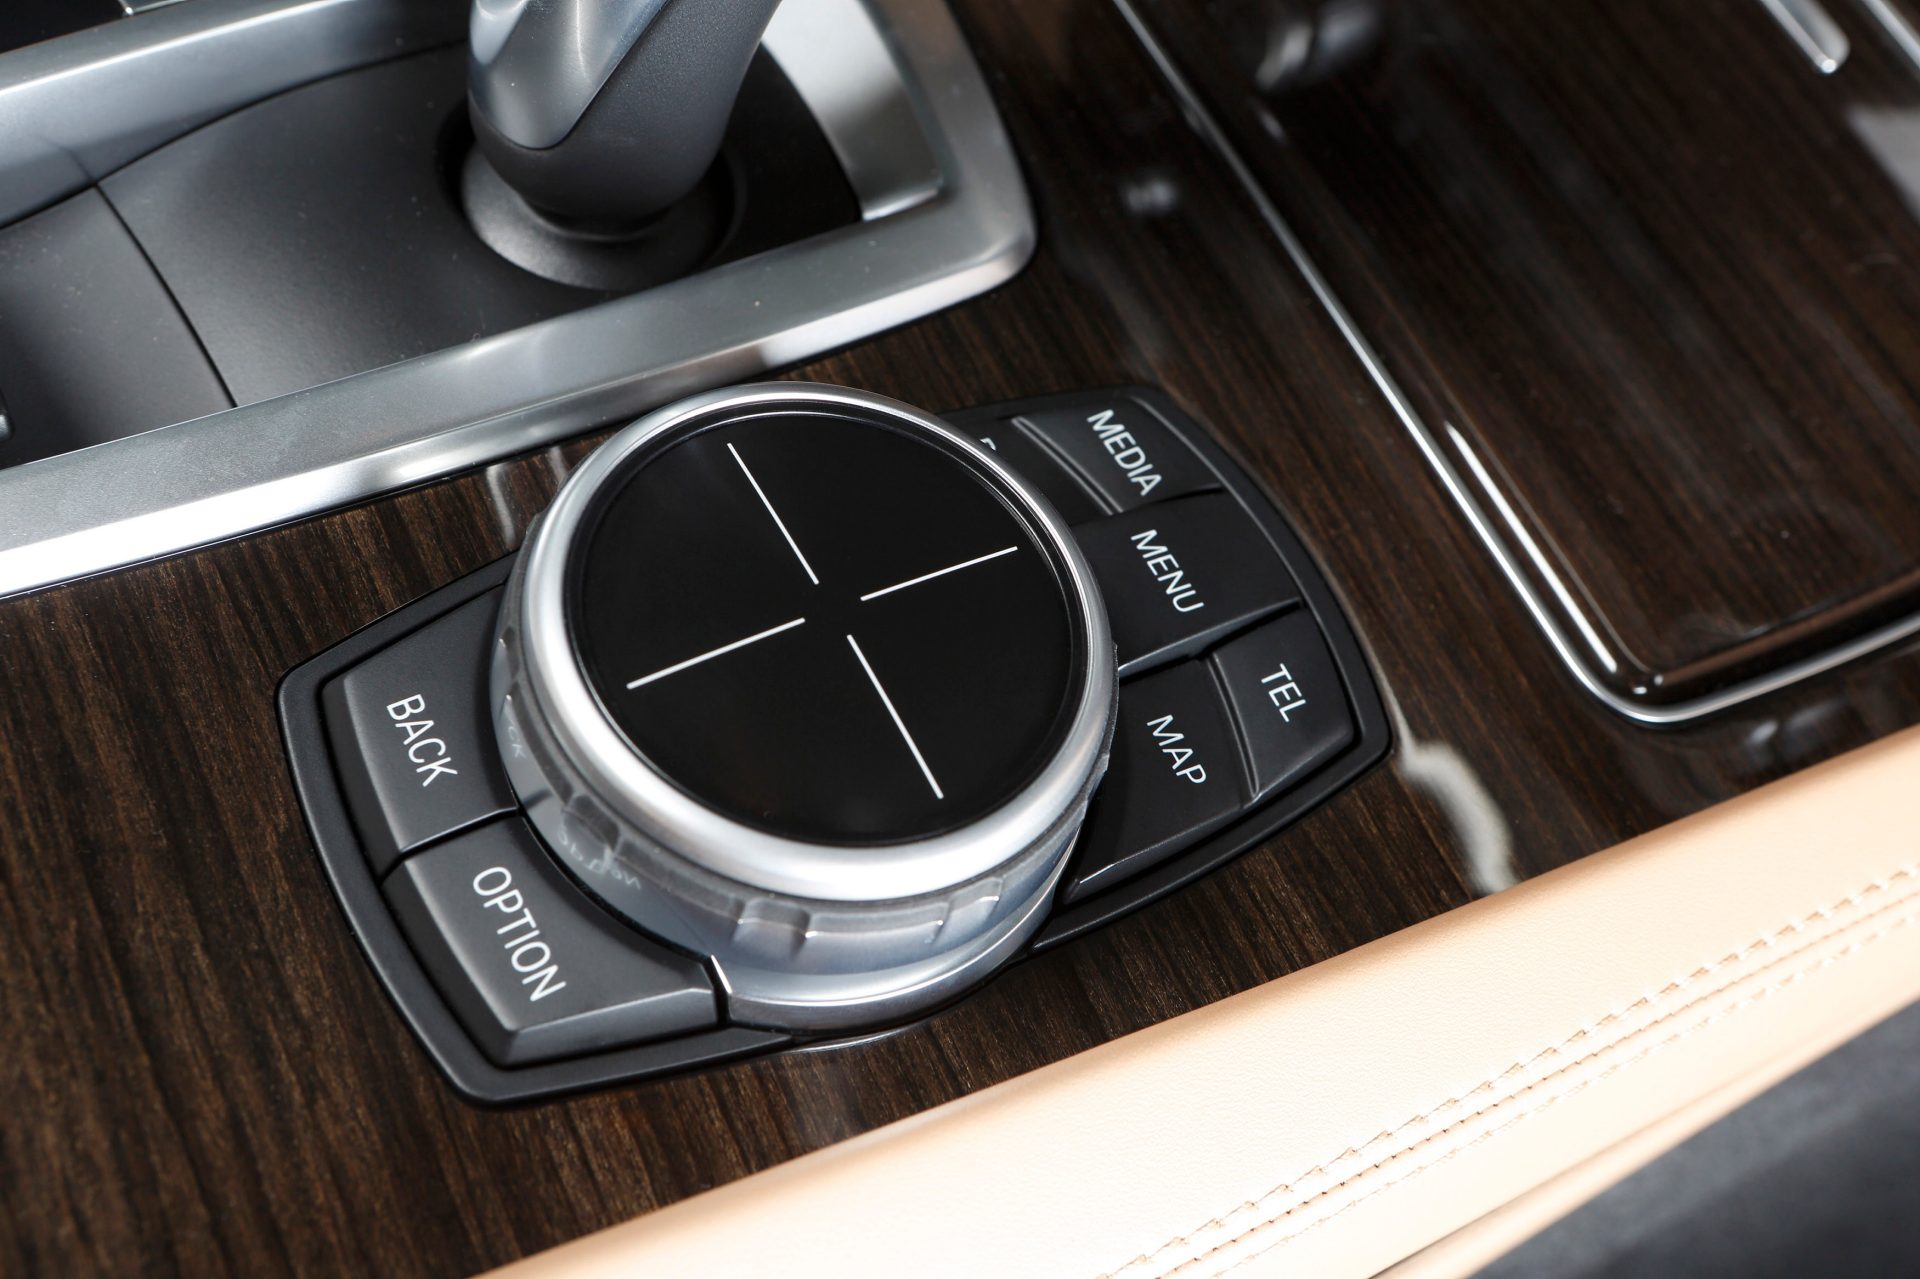 Direct selection buttons and touch controllers made the BMW iDrive even easier to use.